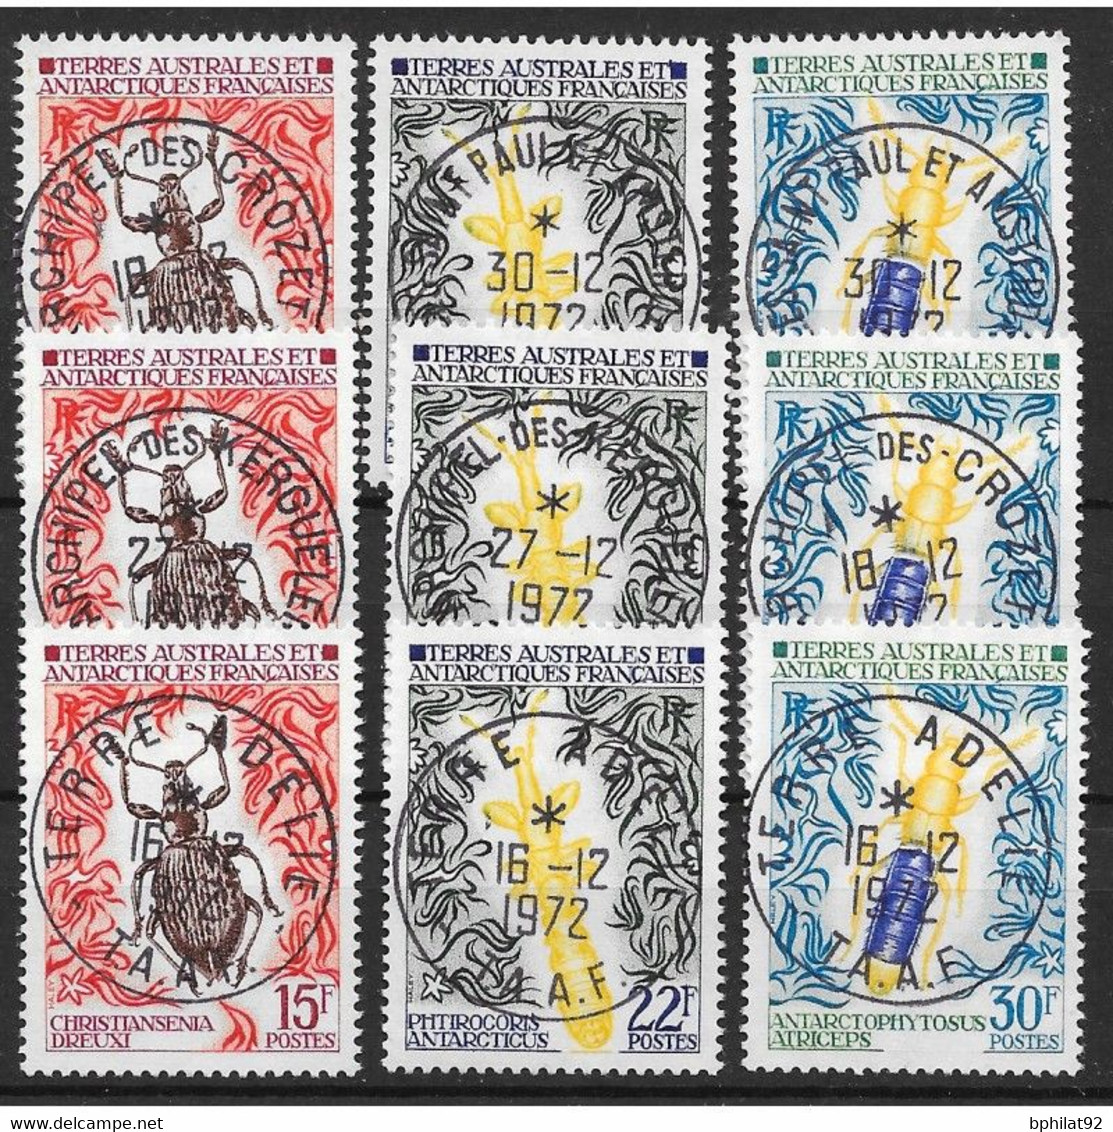 !!! TAAF : FAUNE N° 49/51 TB OBLITÉRATIONS DES 3 DISTRICTS - SUPERBE - Used Stamps